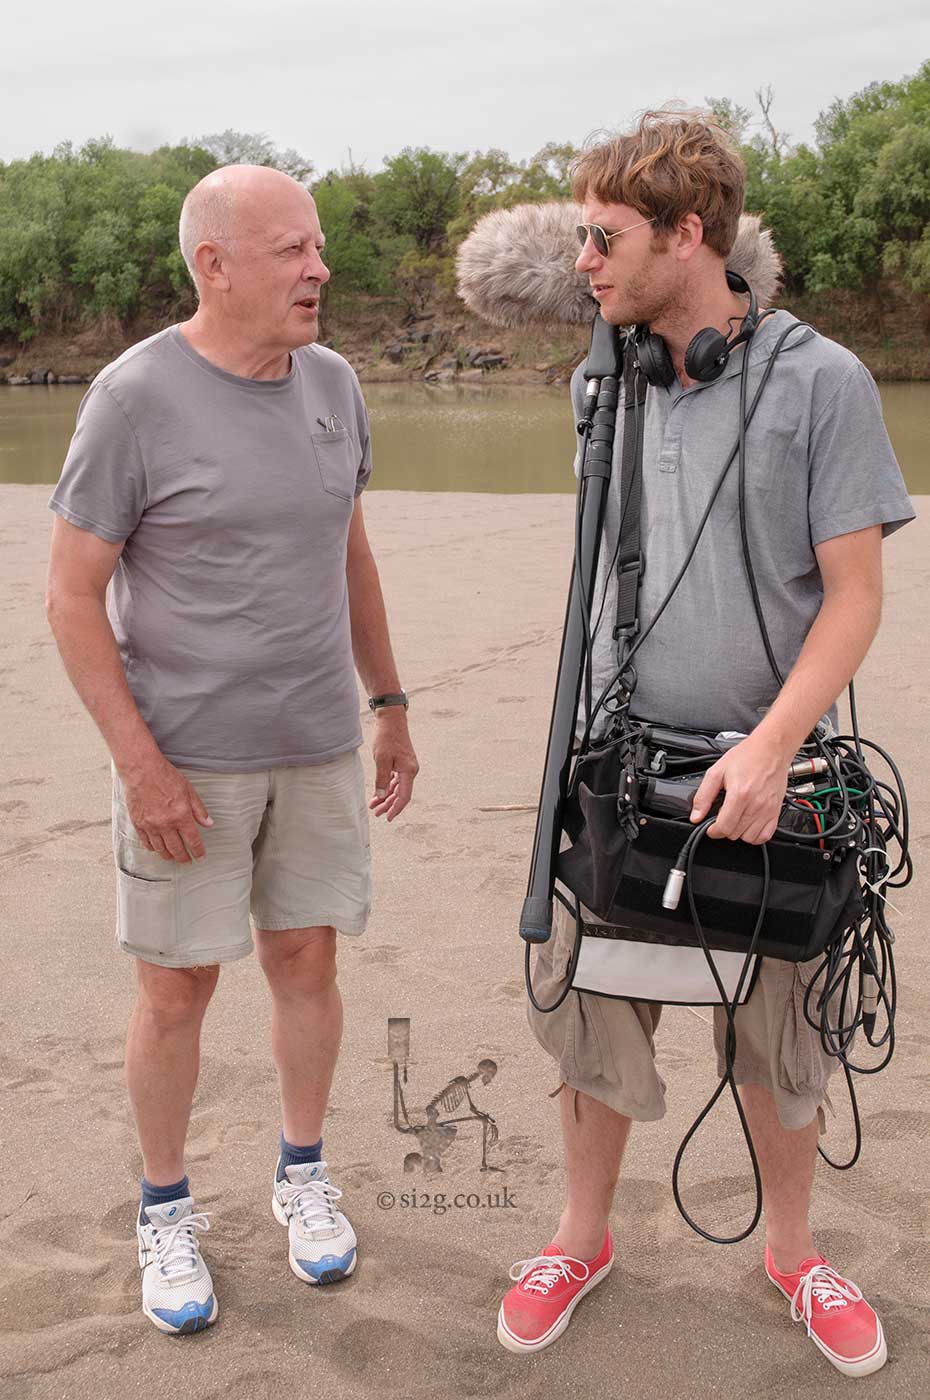 Crew Jokes - Colin the sound recordist listens to the same joke Rob has told for the hundredth time.